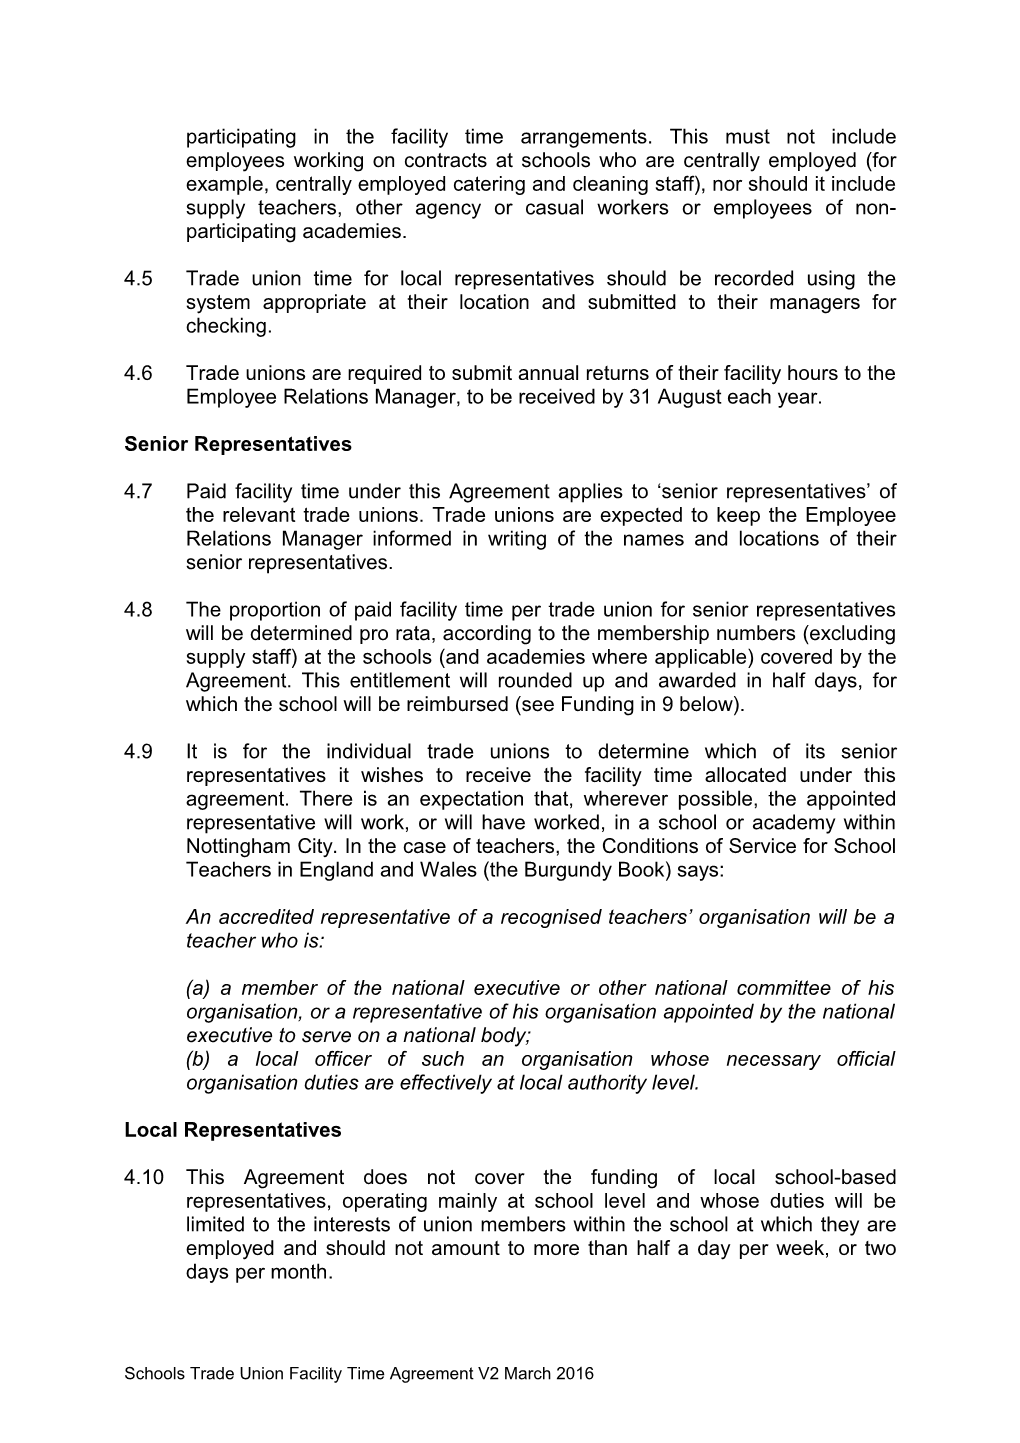 Trade Union Facilities and Facility Time Agreement for Representatives of Nottingham City